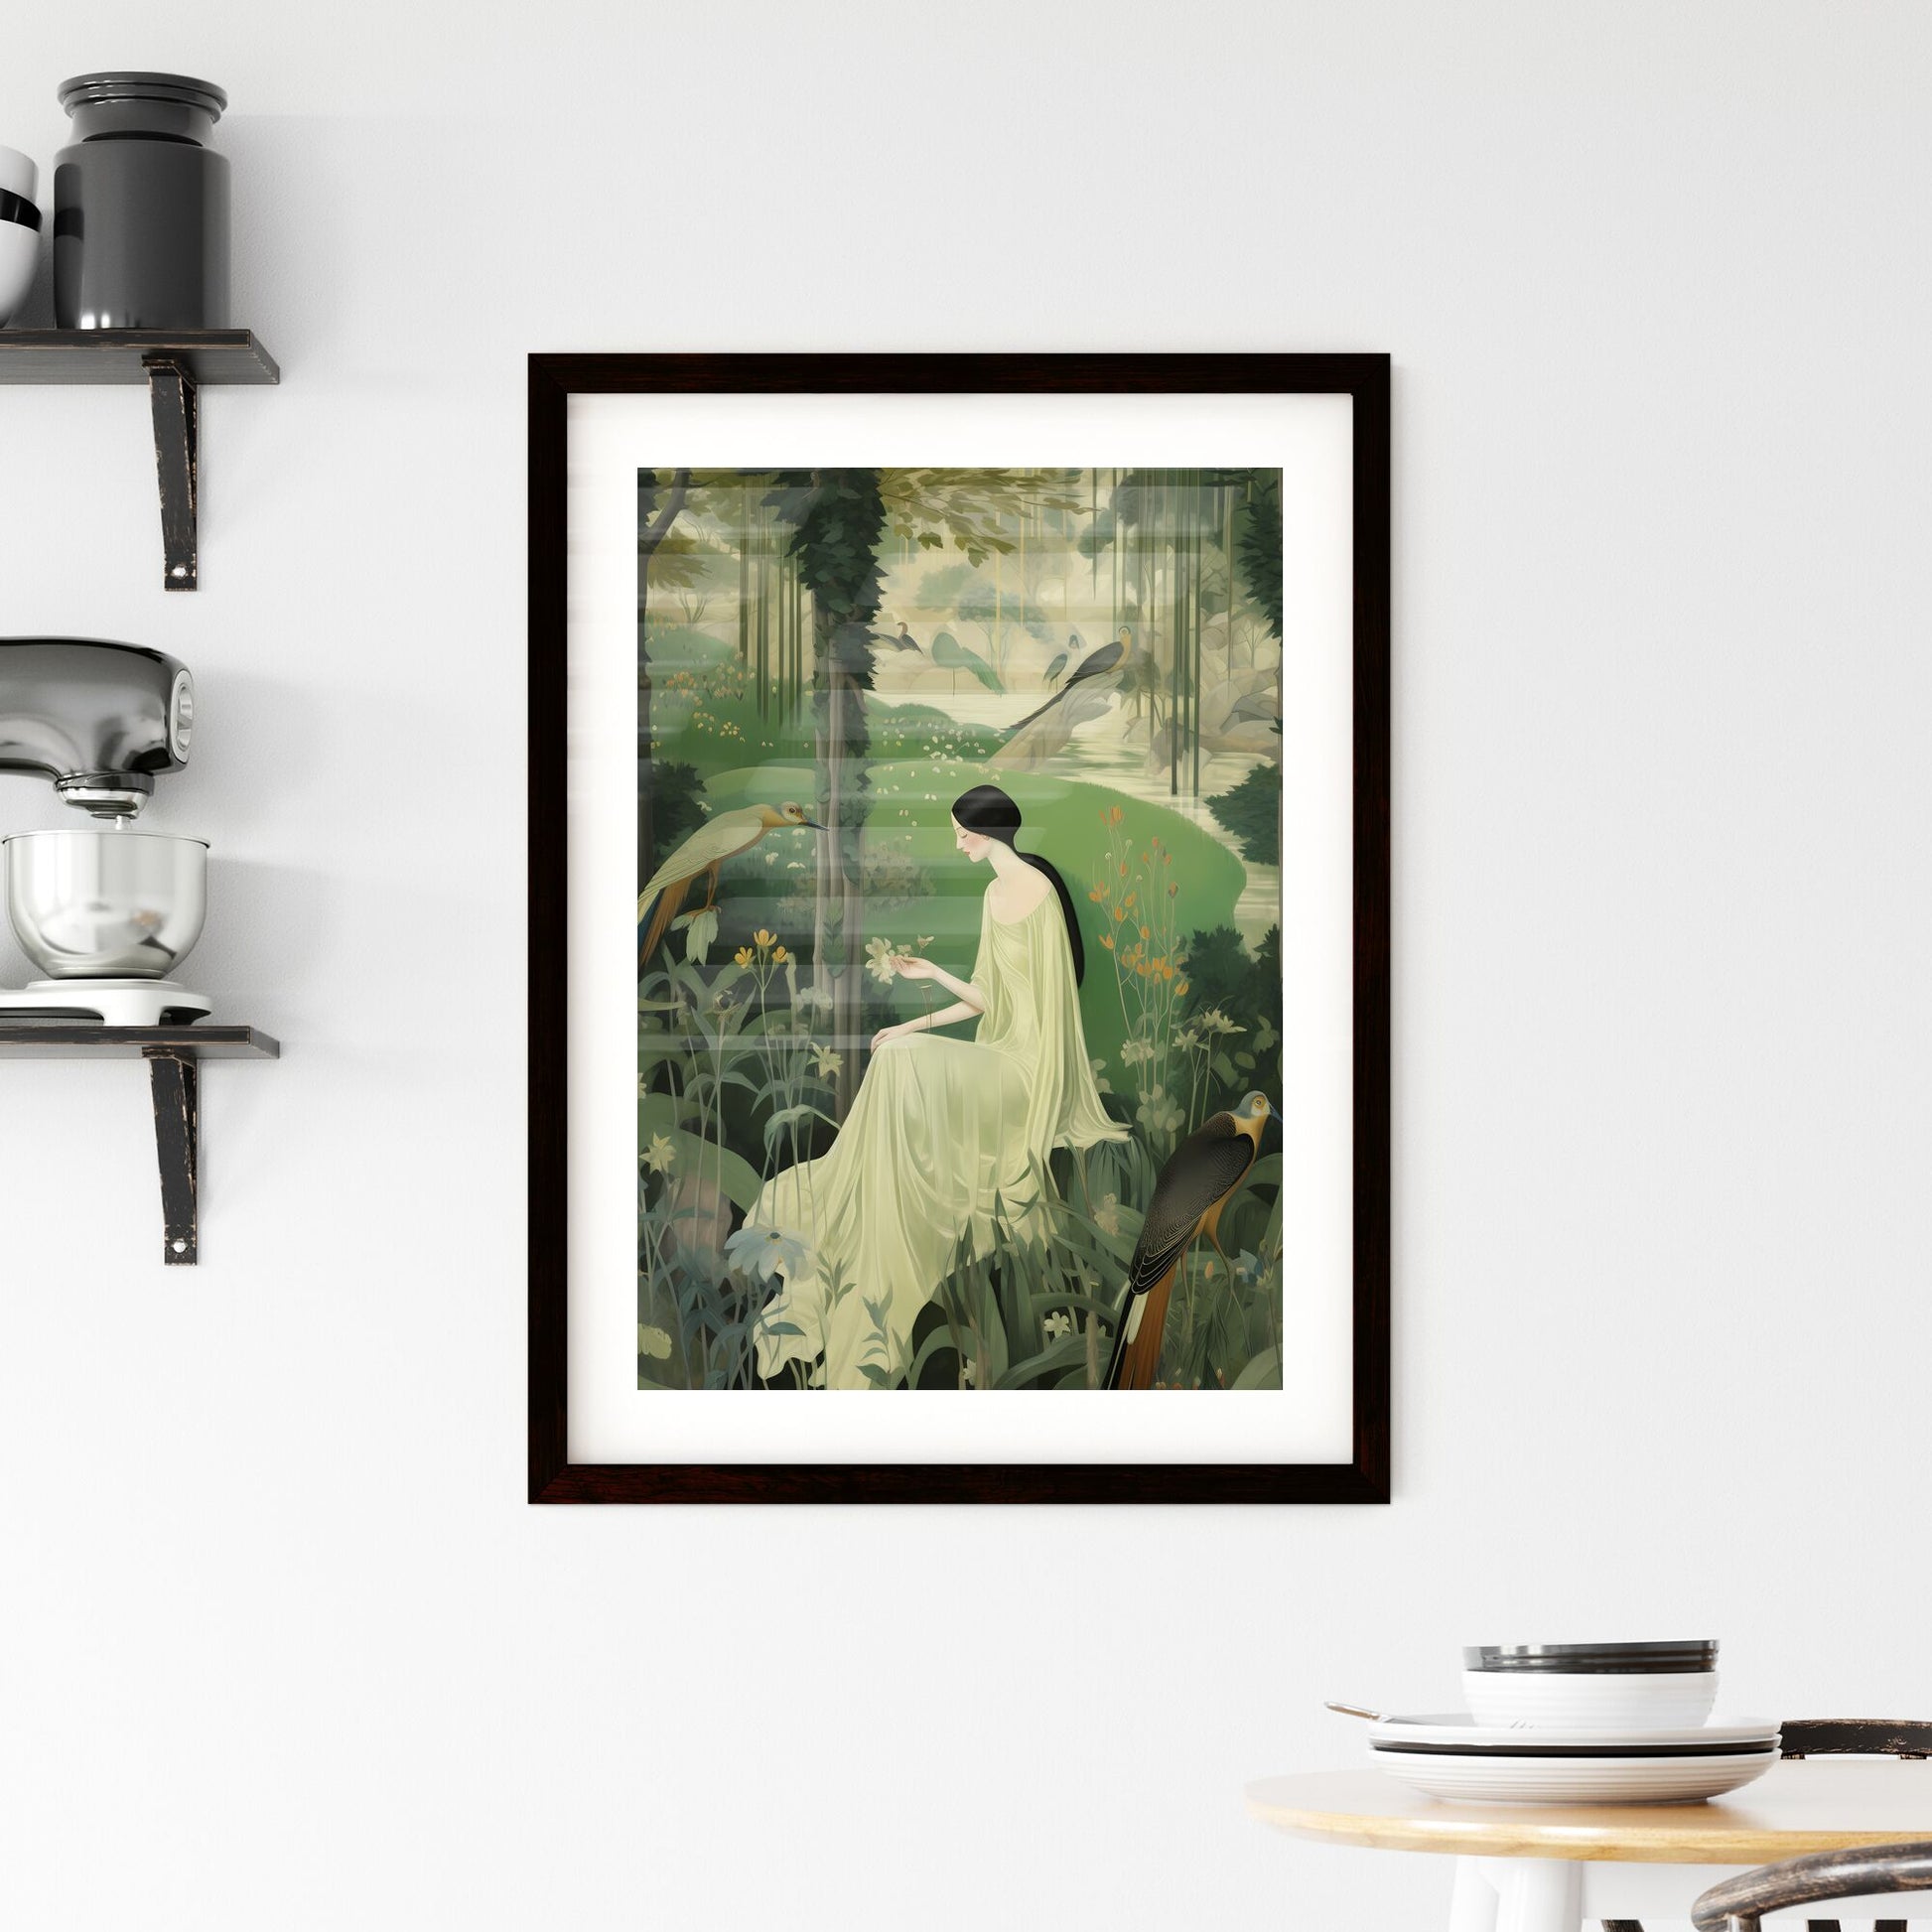 A Poster of the large tapestry and its green colors - A Woman In A White Dress Sitting In A Forest With Birds Default Title